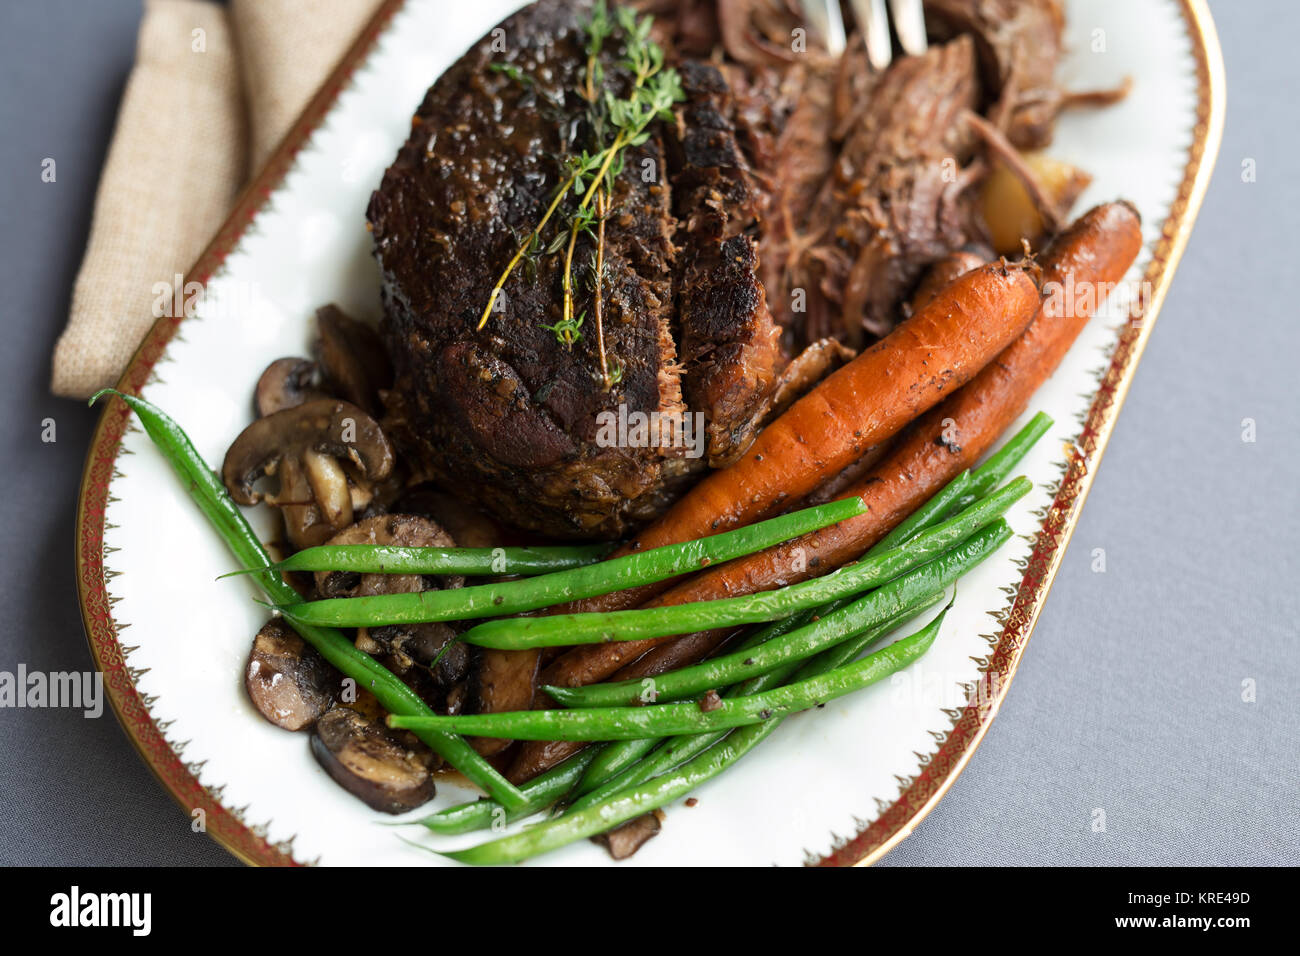 Close up shot of a pot roast with carrots, green beans and mushrooms on a white platter with gold rim. Stock Photo